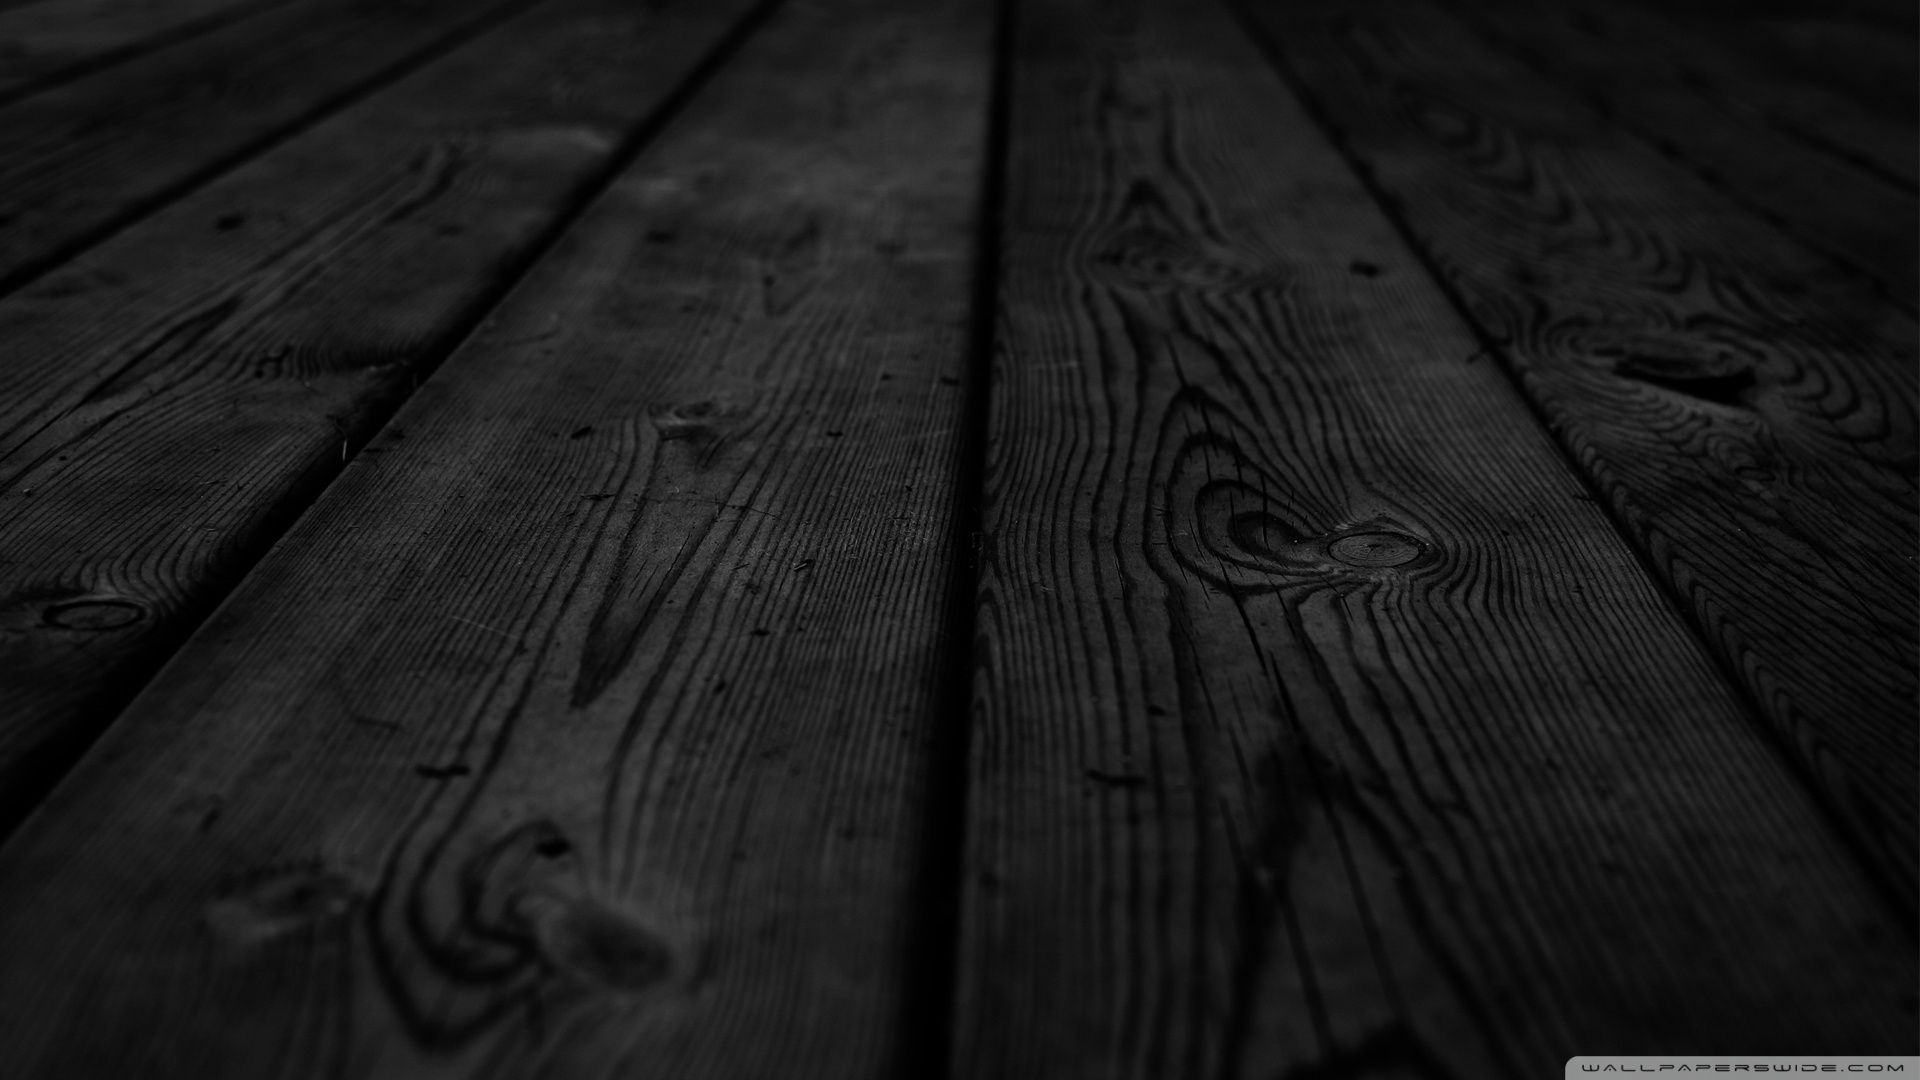 35 HD Wood Wallpapers / Backgrounds For Free Download